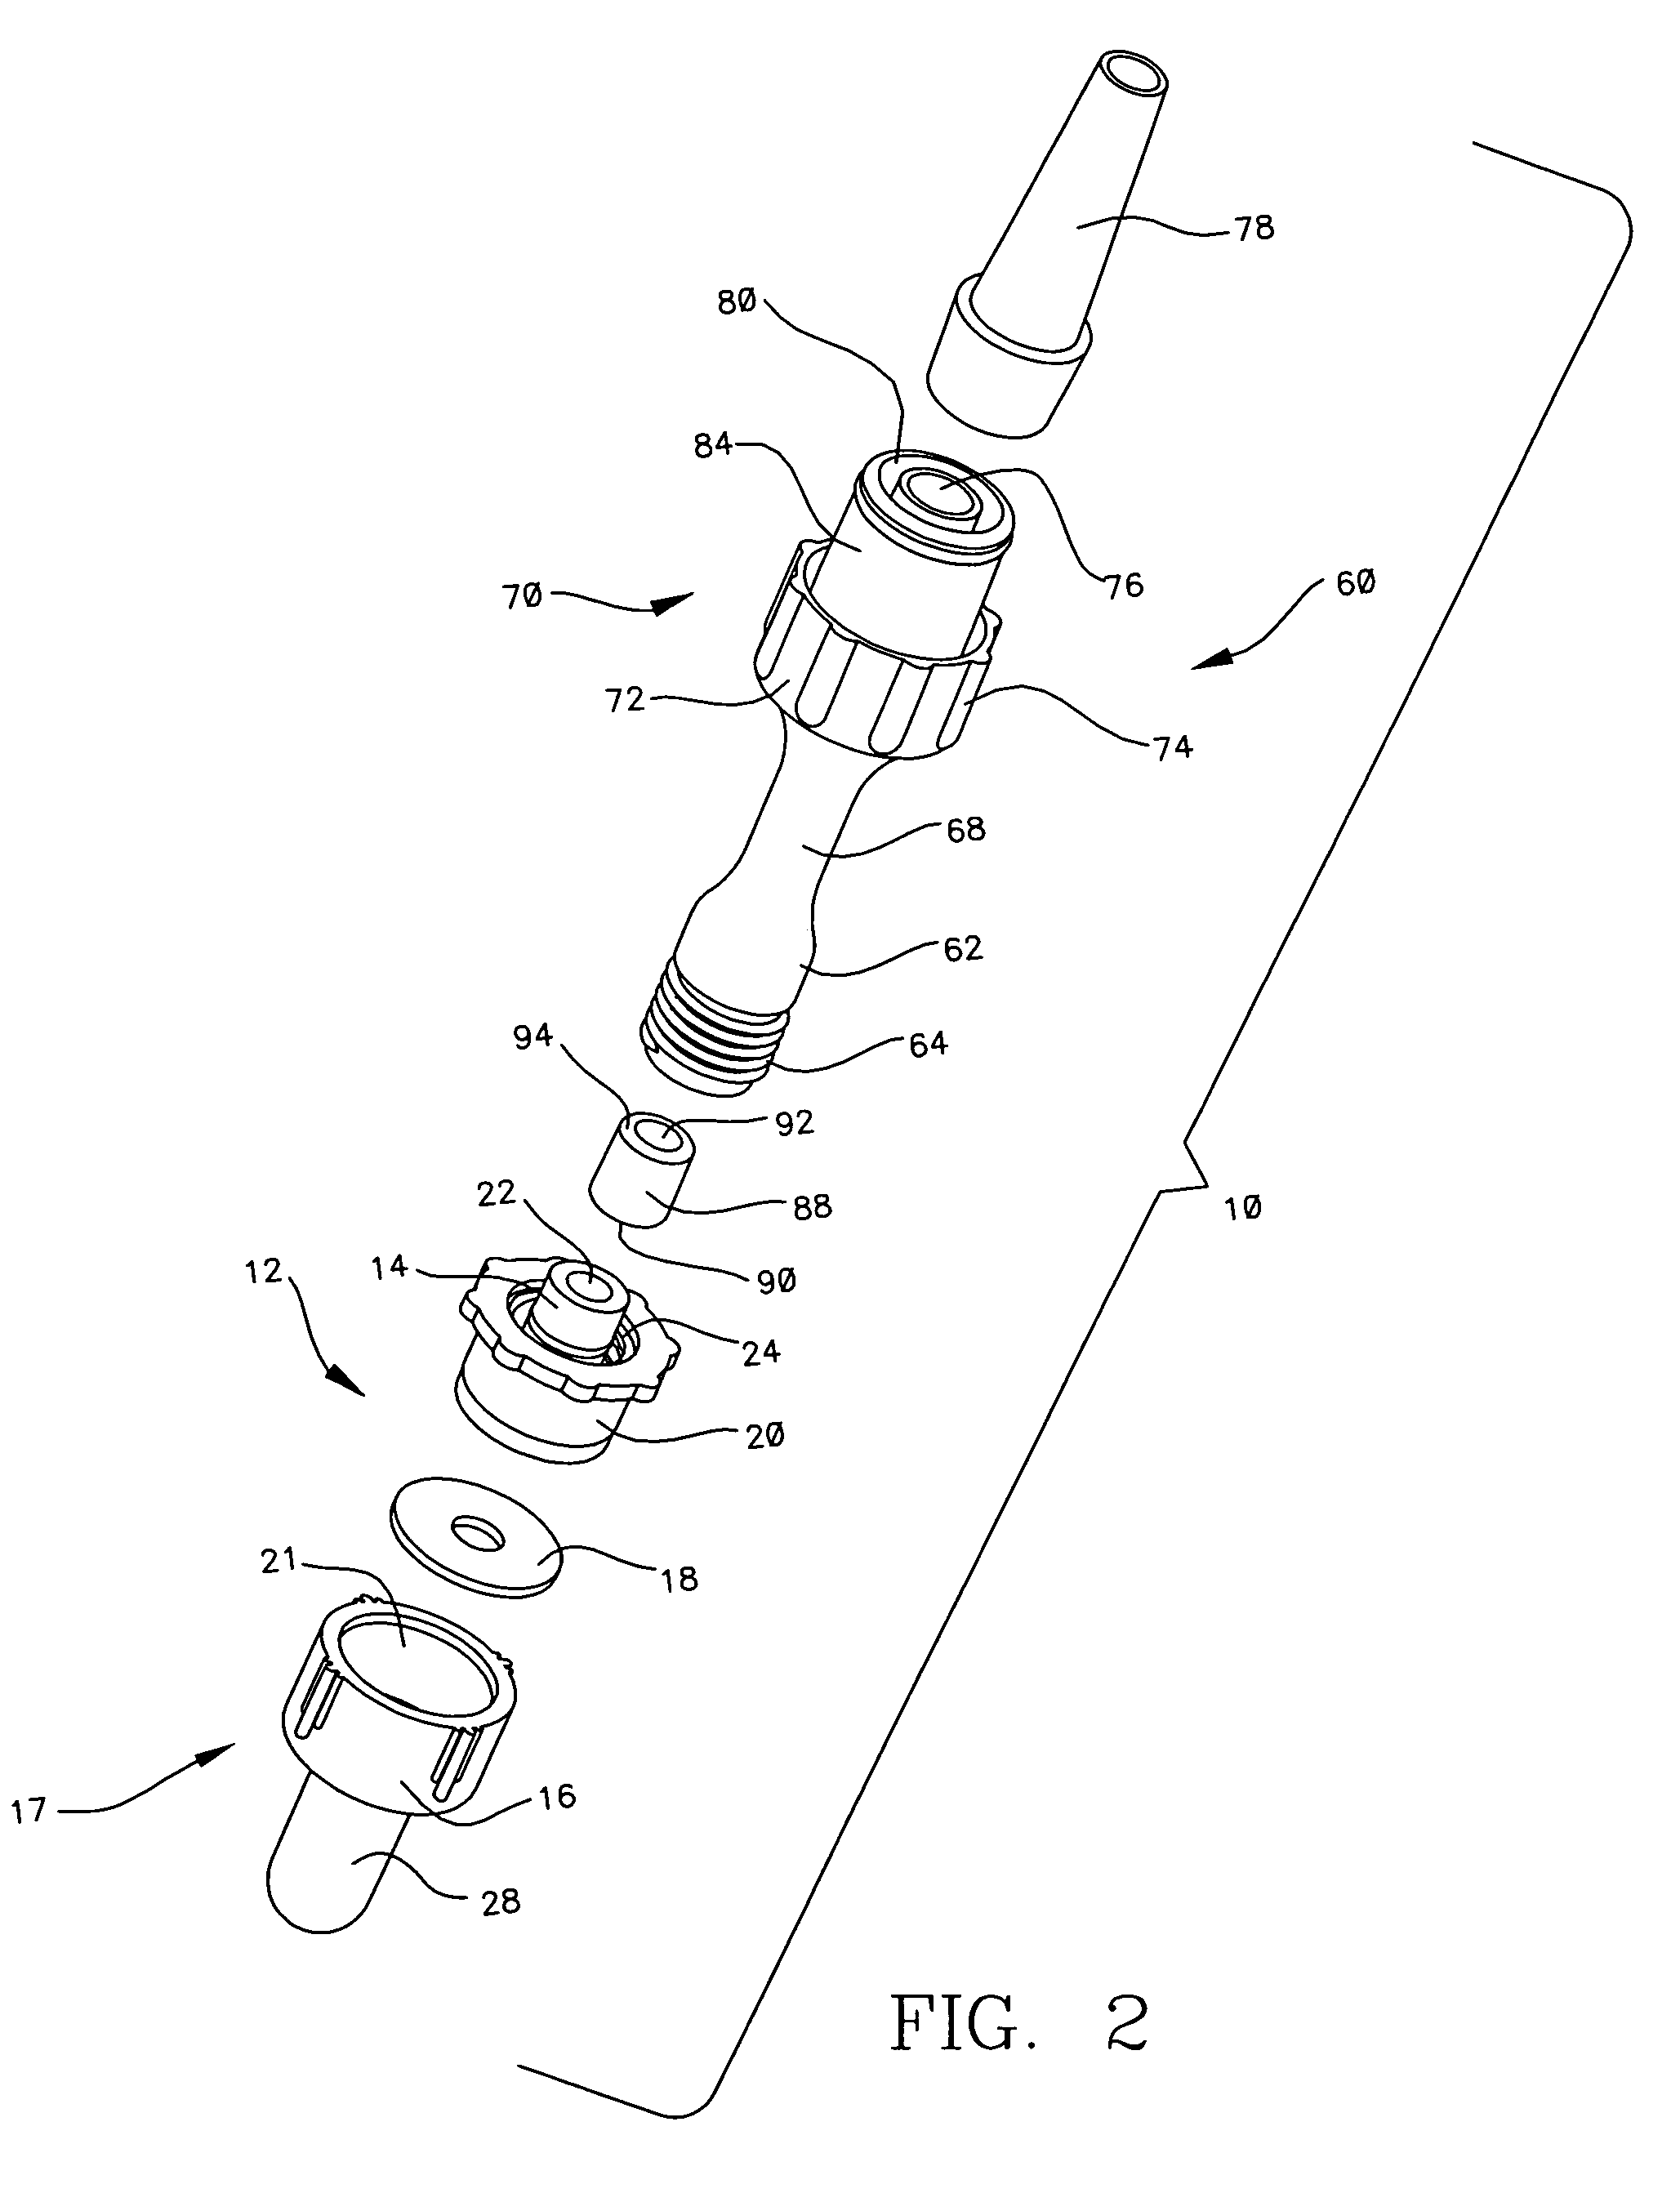 Clamping assembly for limiting the depth of insertion of a respiratory care treatment device